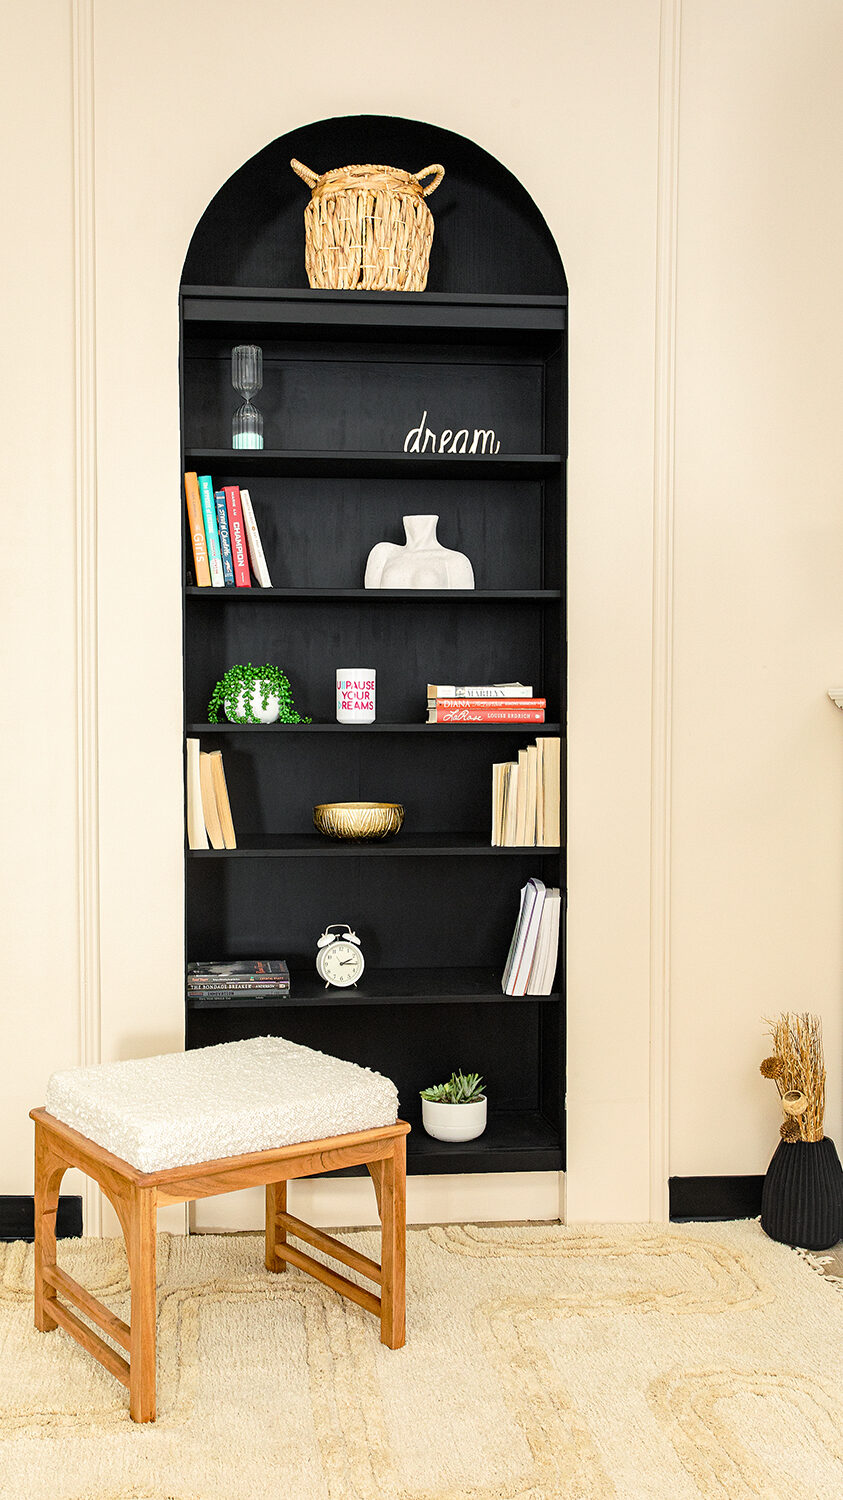 Bookshelf with chair and props for brand photography